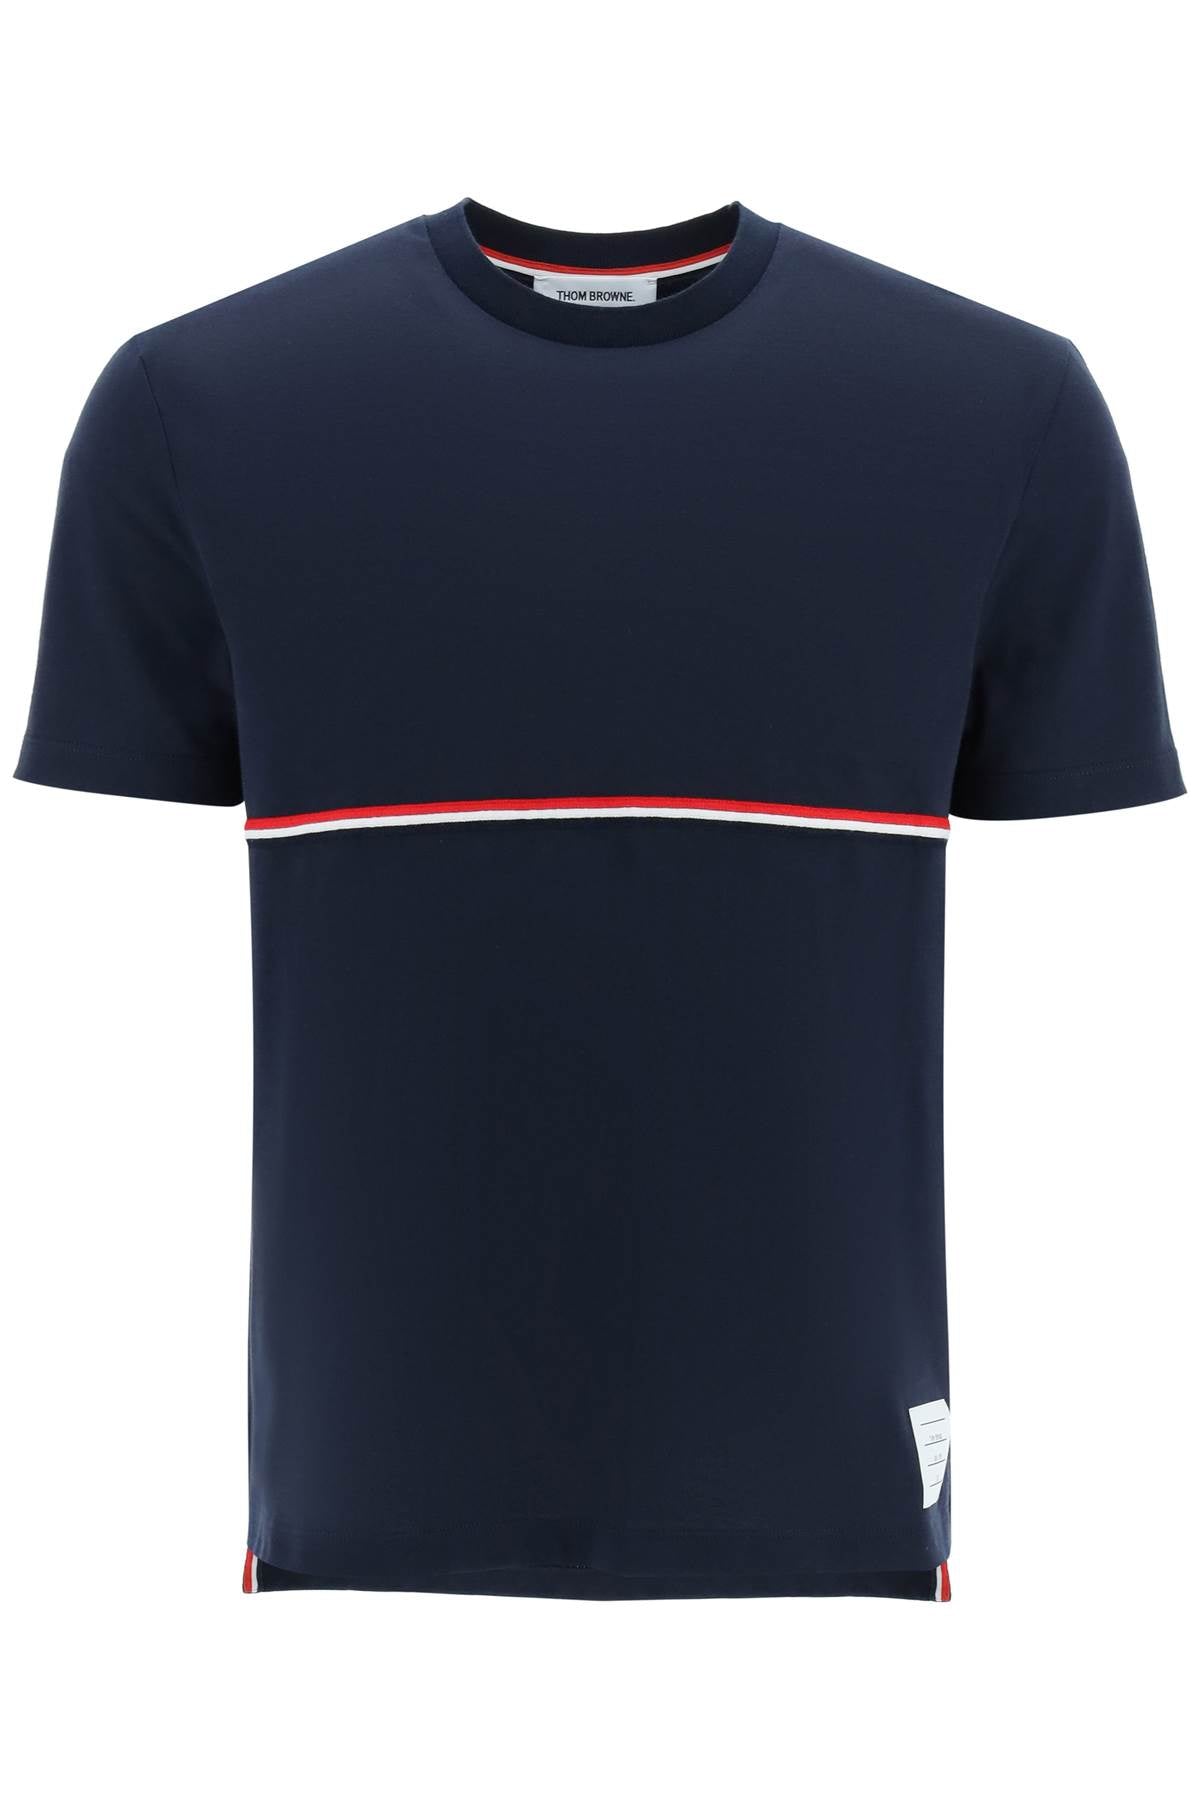 Thom browne t-shirt with tricolor pocket-0